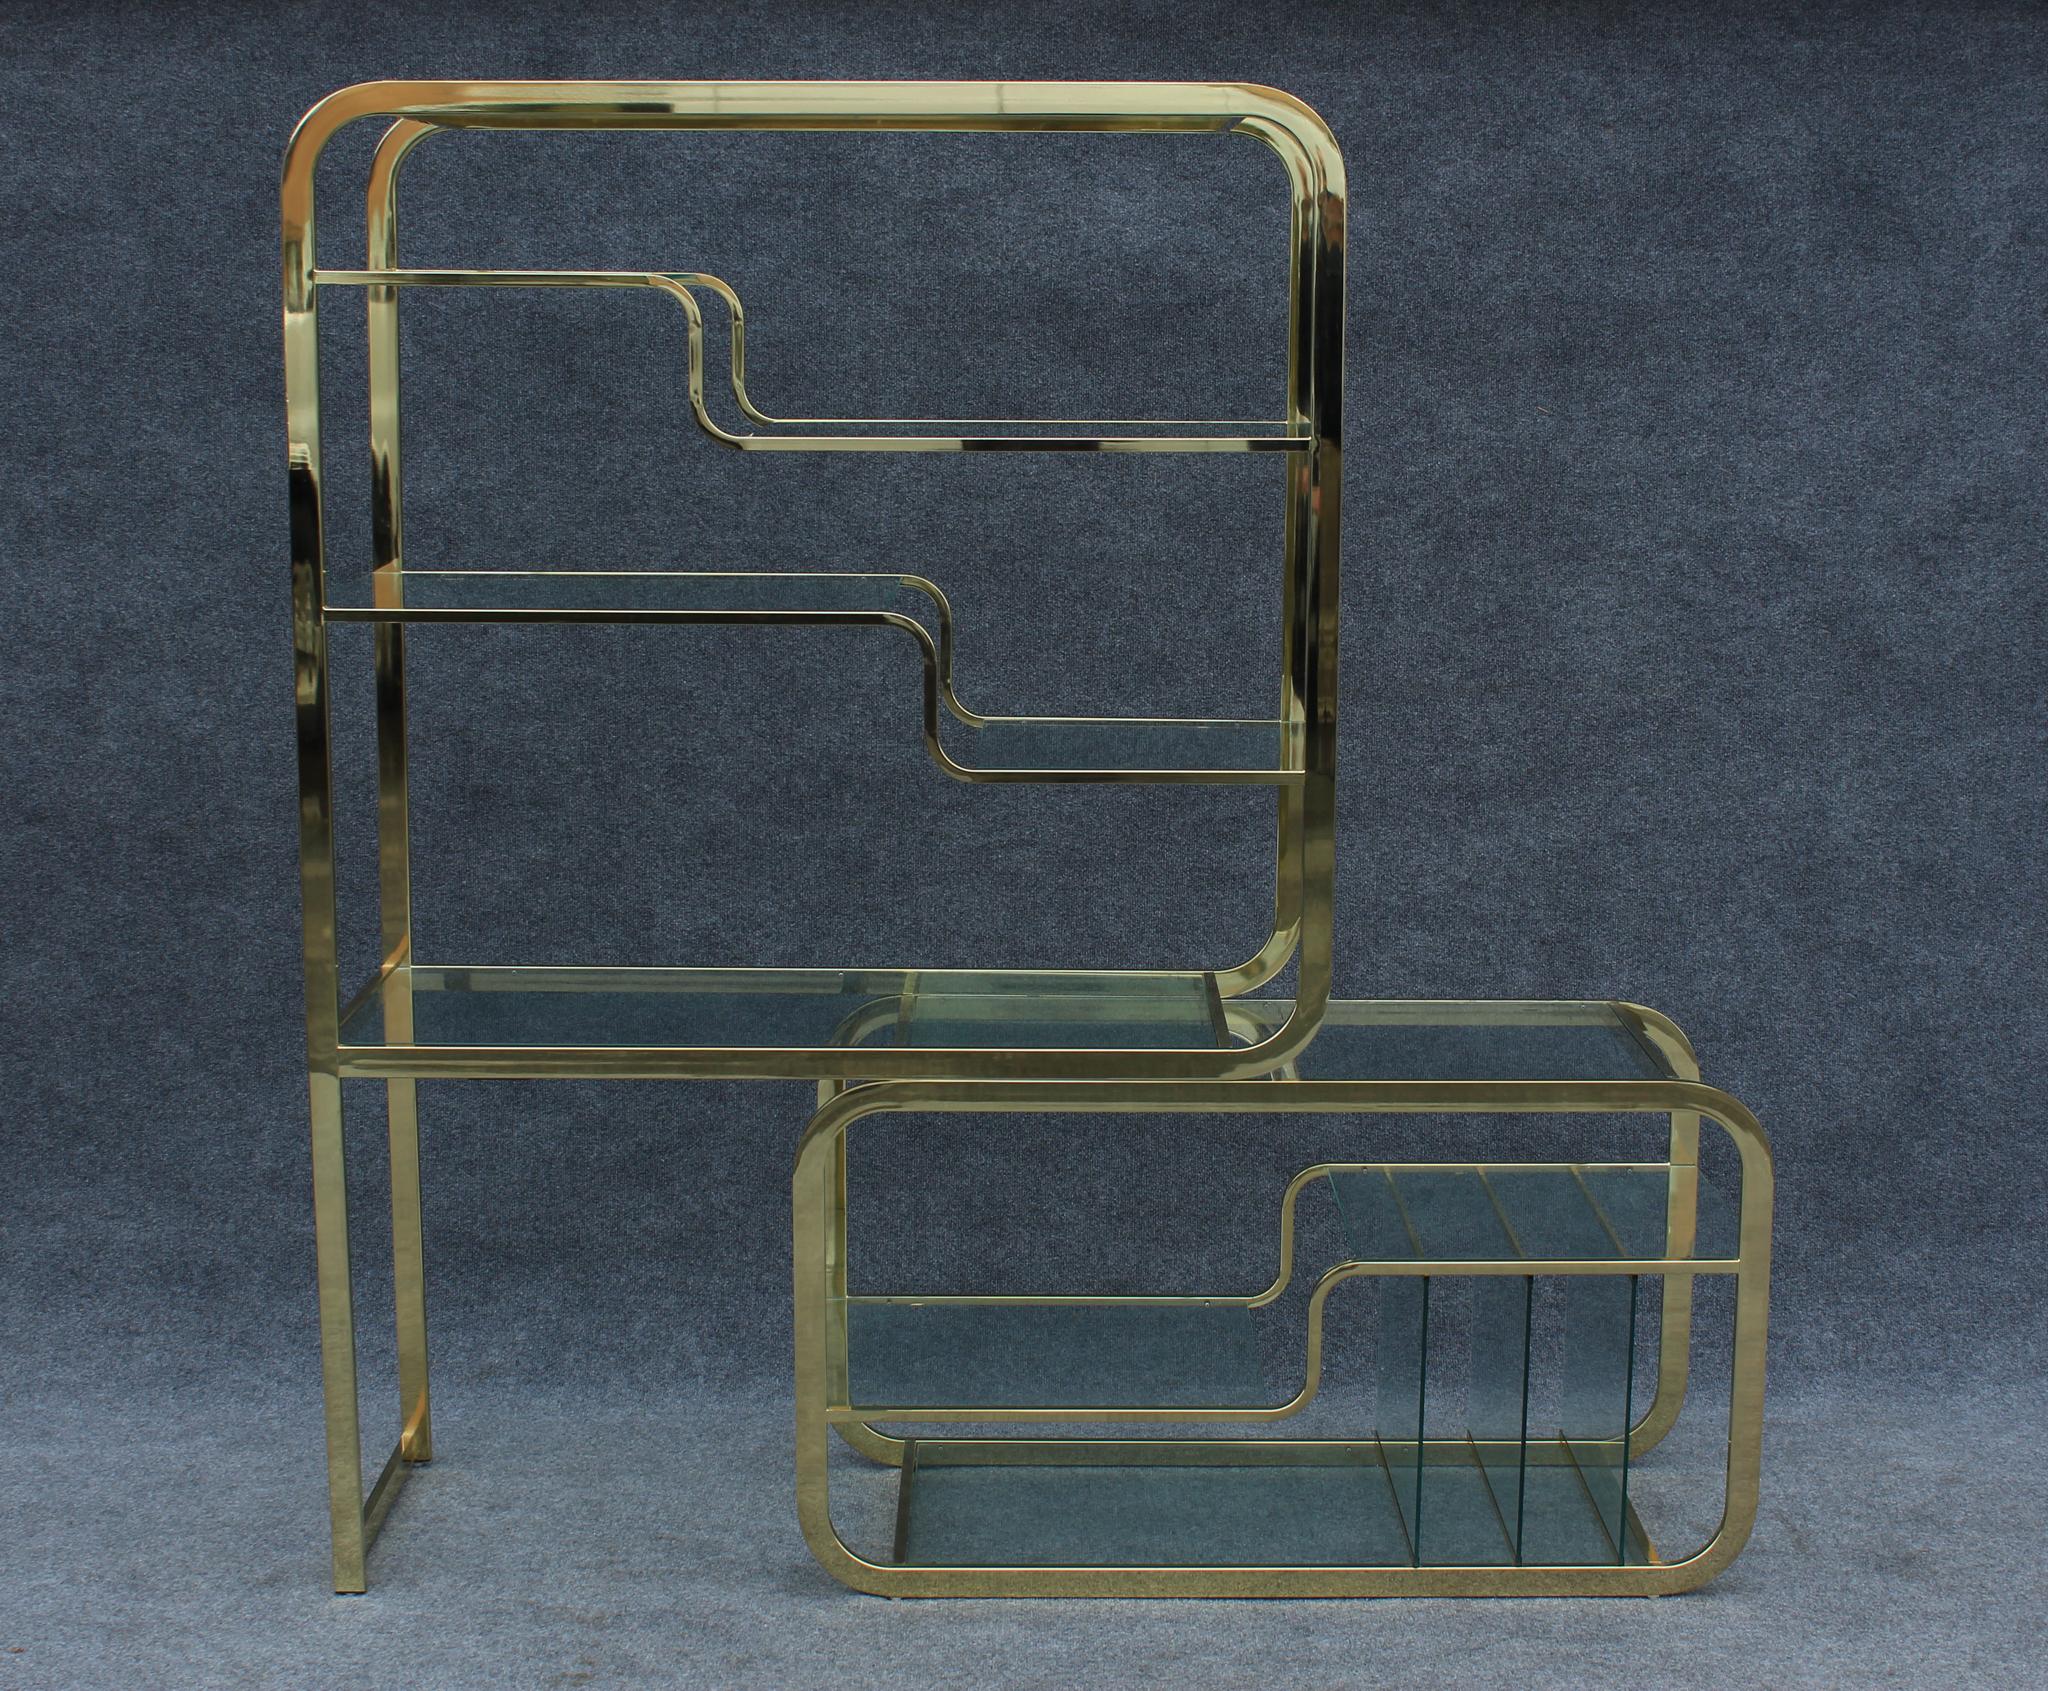 Designed after American legend Milo Baughman, this etagere was manufactured by Design Institute America towards the end of the 1970s. Made of two separate frames of brass plated steel, this etagere features numerous different sized shelves at